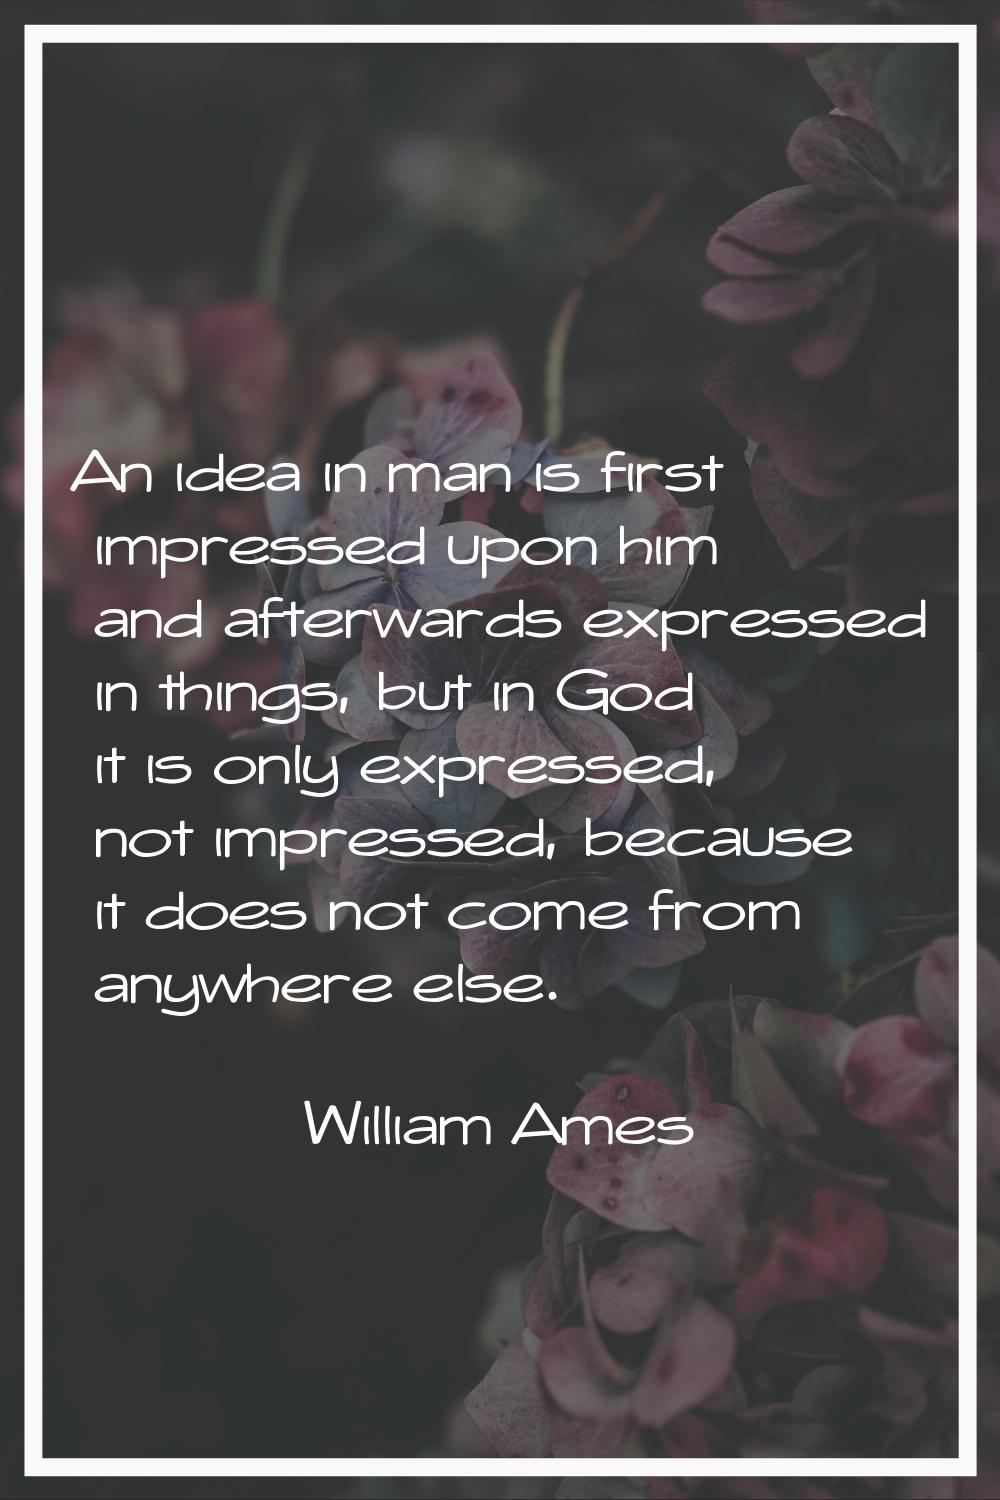 An idea in man is first impressed upon him and afterwards expressed in things, but in God it is onl